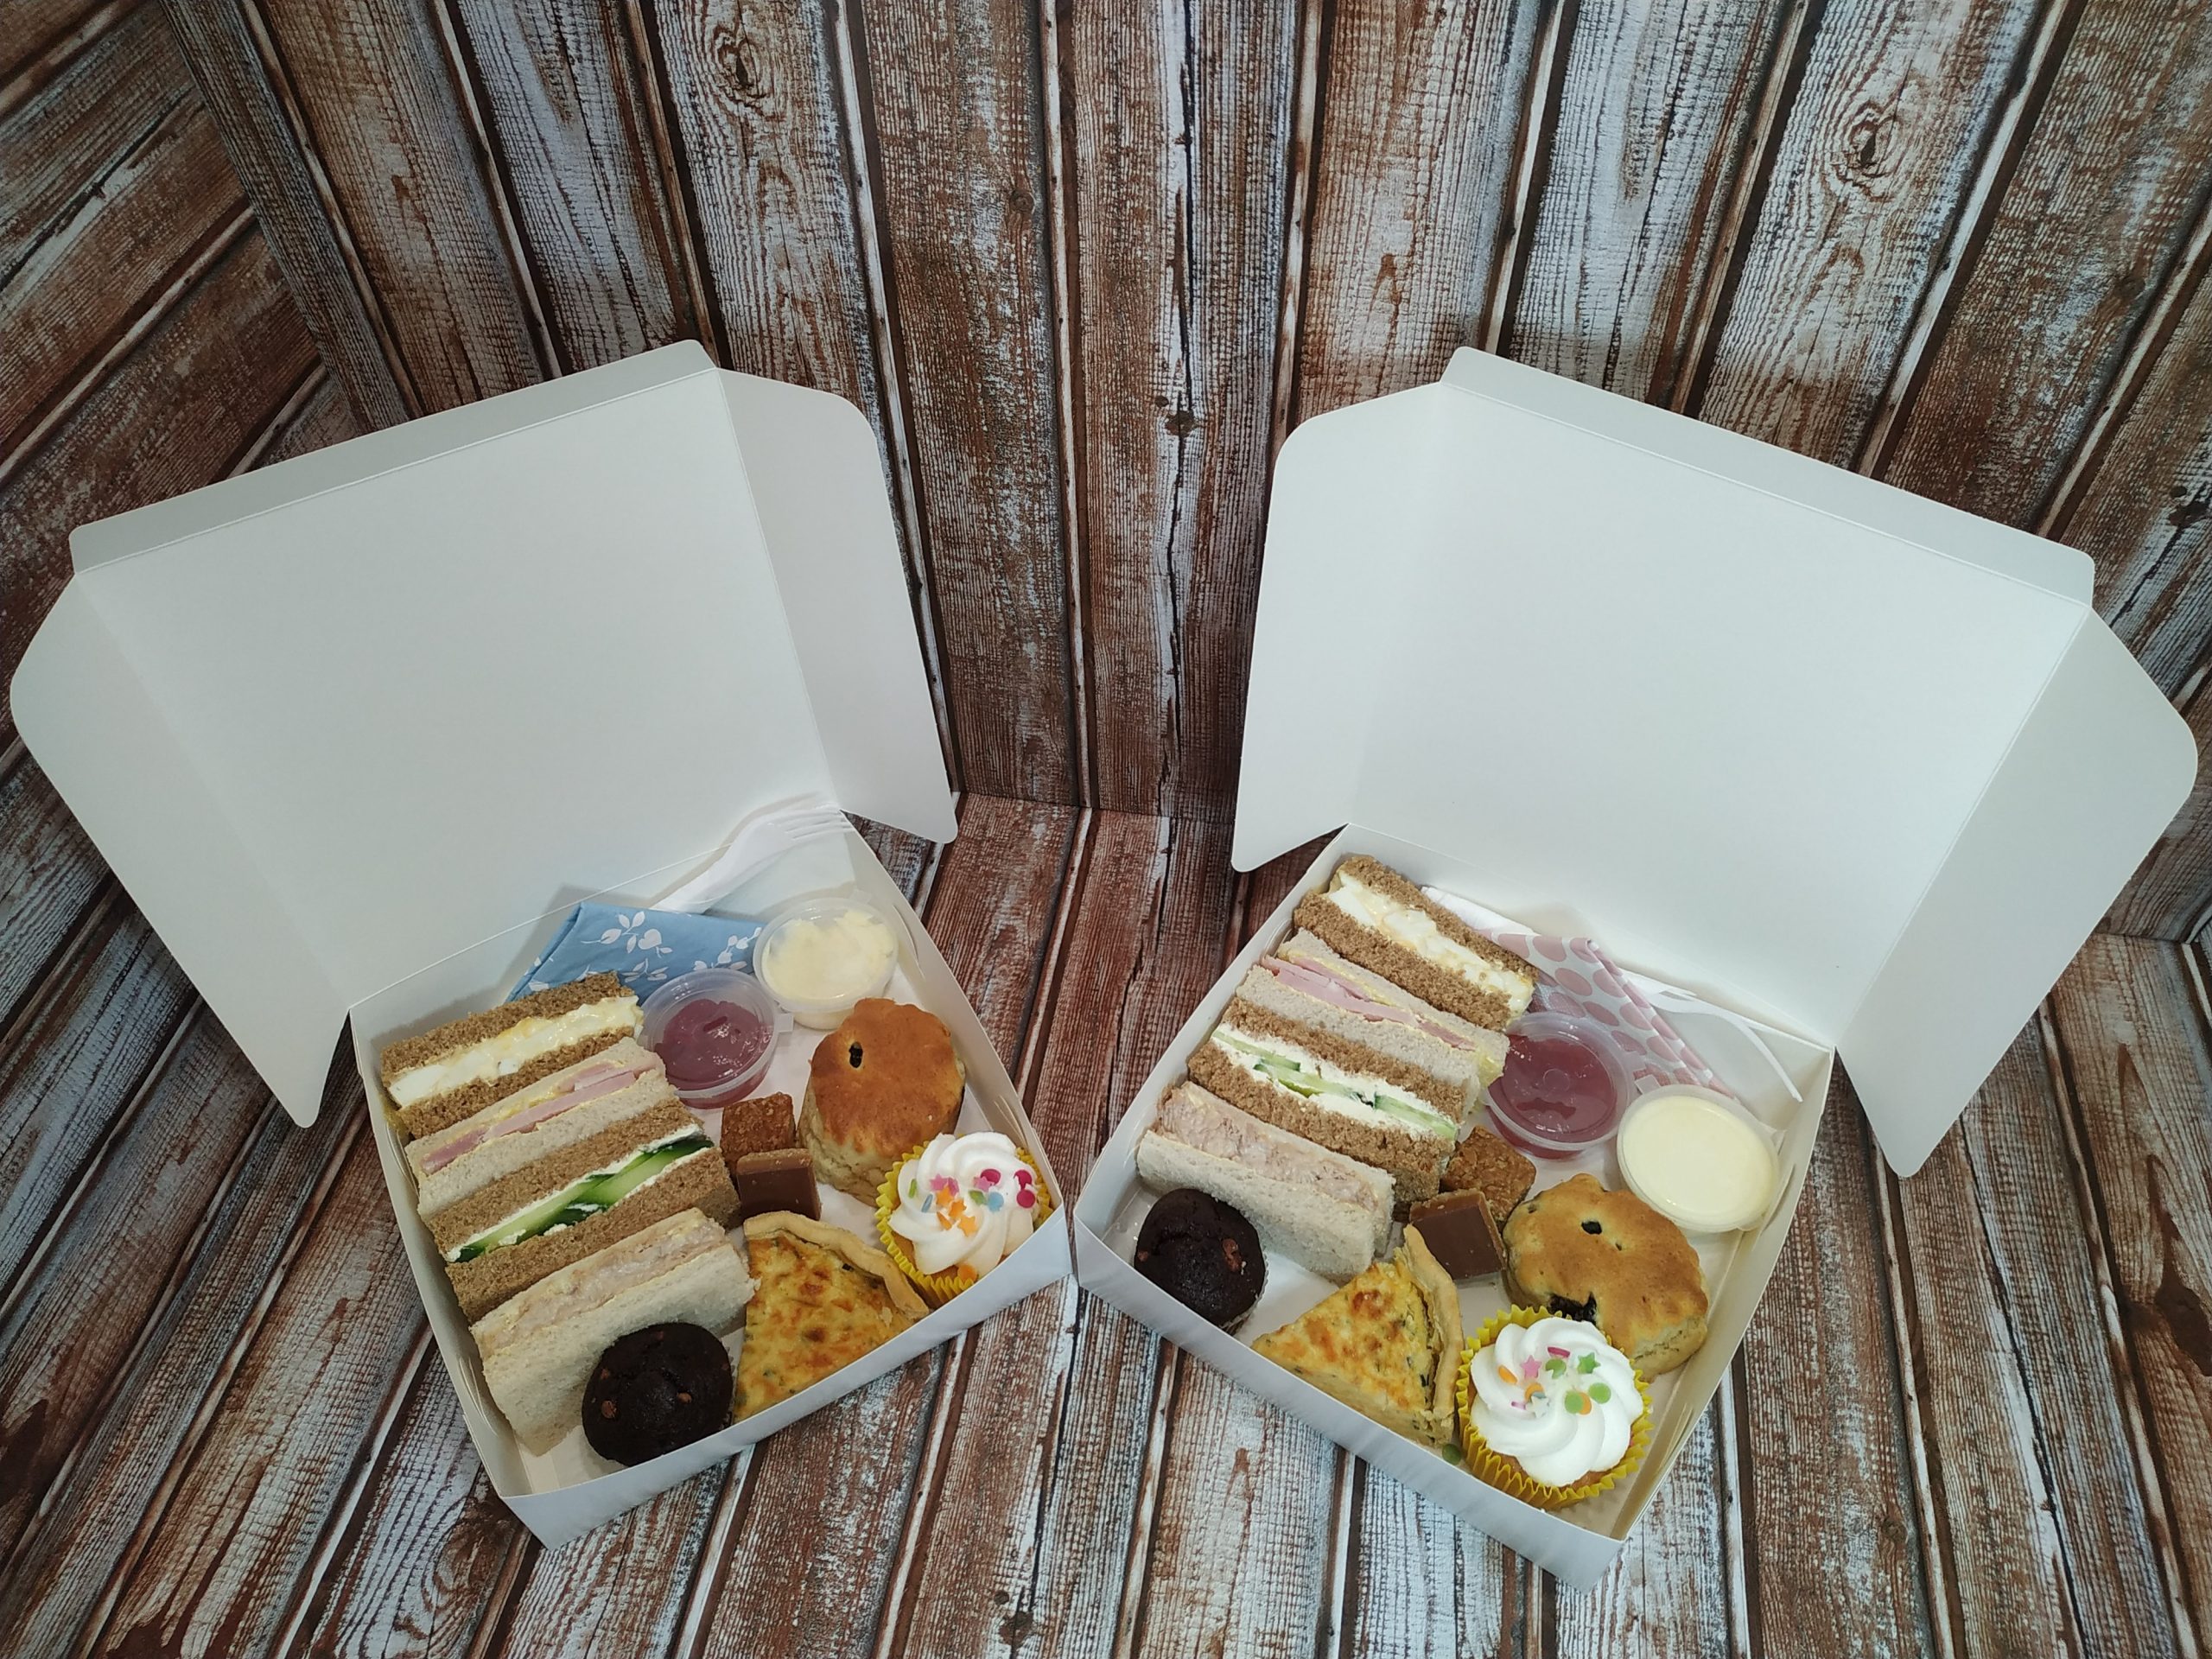 Afternoon Tea Box available to pre-order from Sandwich in the Square